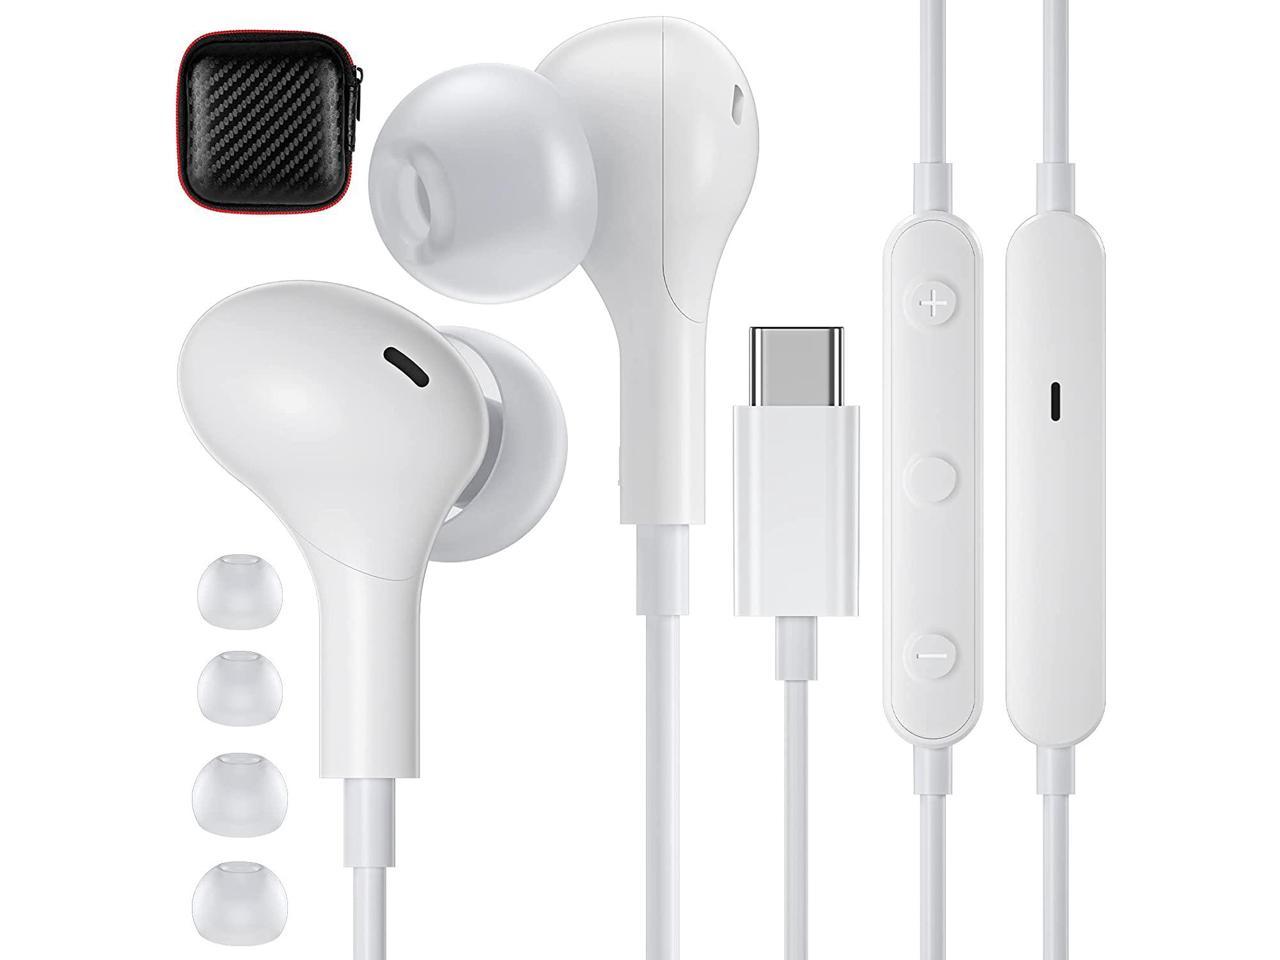 iPad Mini 6 Noise Isolation USB C Earphones with 192KHz/24bit DAC For Samsung S22/S21/S20 Ultra Note 20/10 Tab S8/S7/S6 iPad Air 4 Pixel 6 Pro 5 4 XL Type C Headphones with Microphone iPad Pro